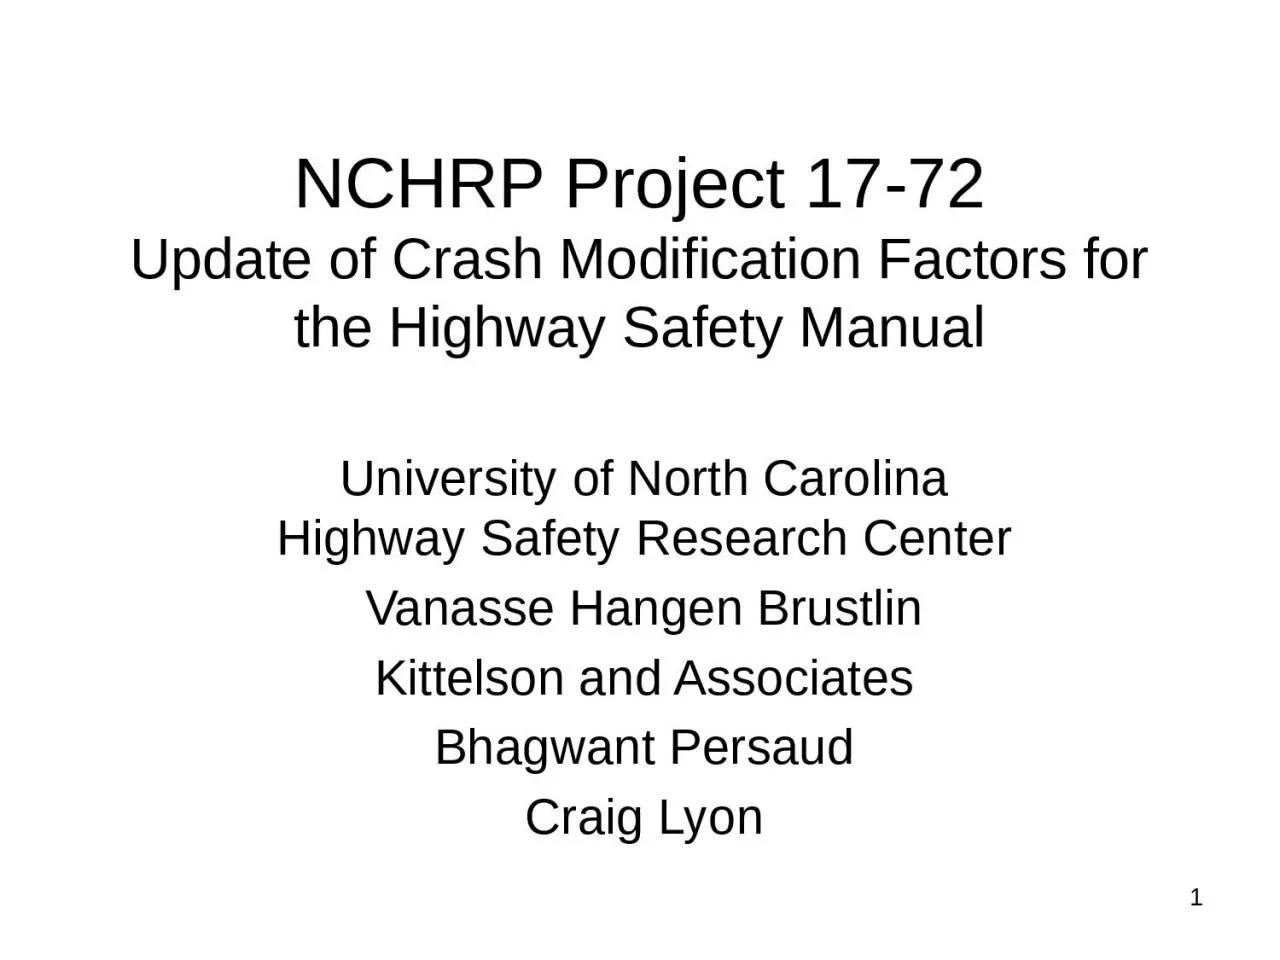 NCHRP Project 17-72 Update of Crash Modification Factors for the Highway Safety Manual